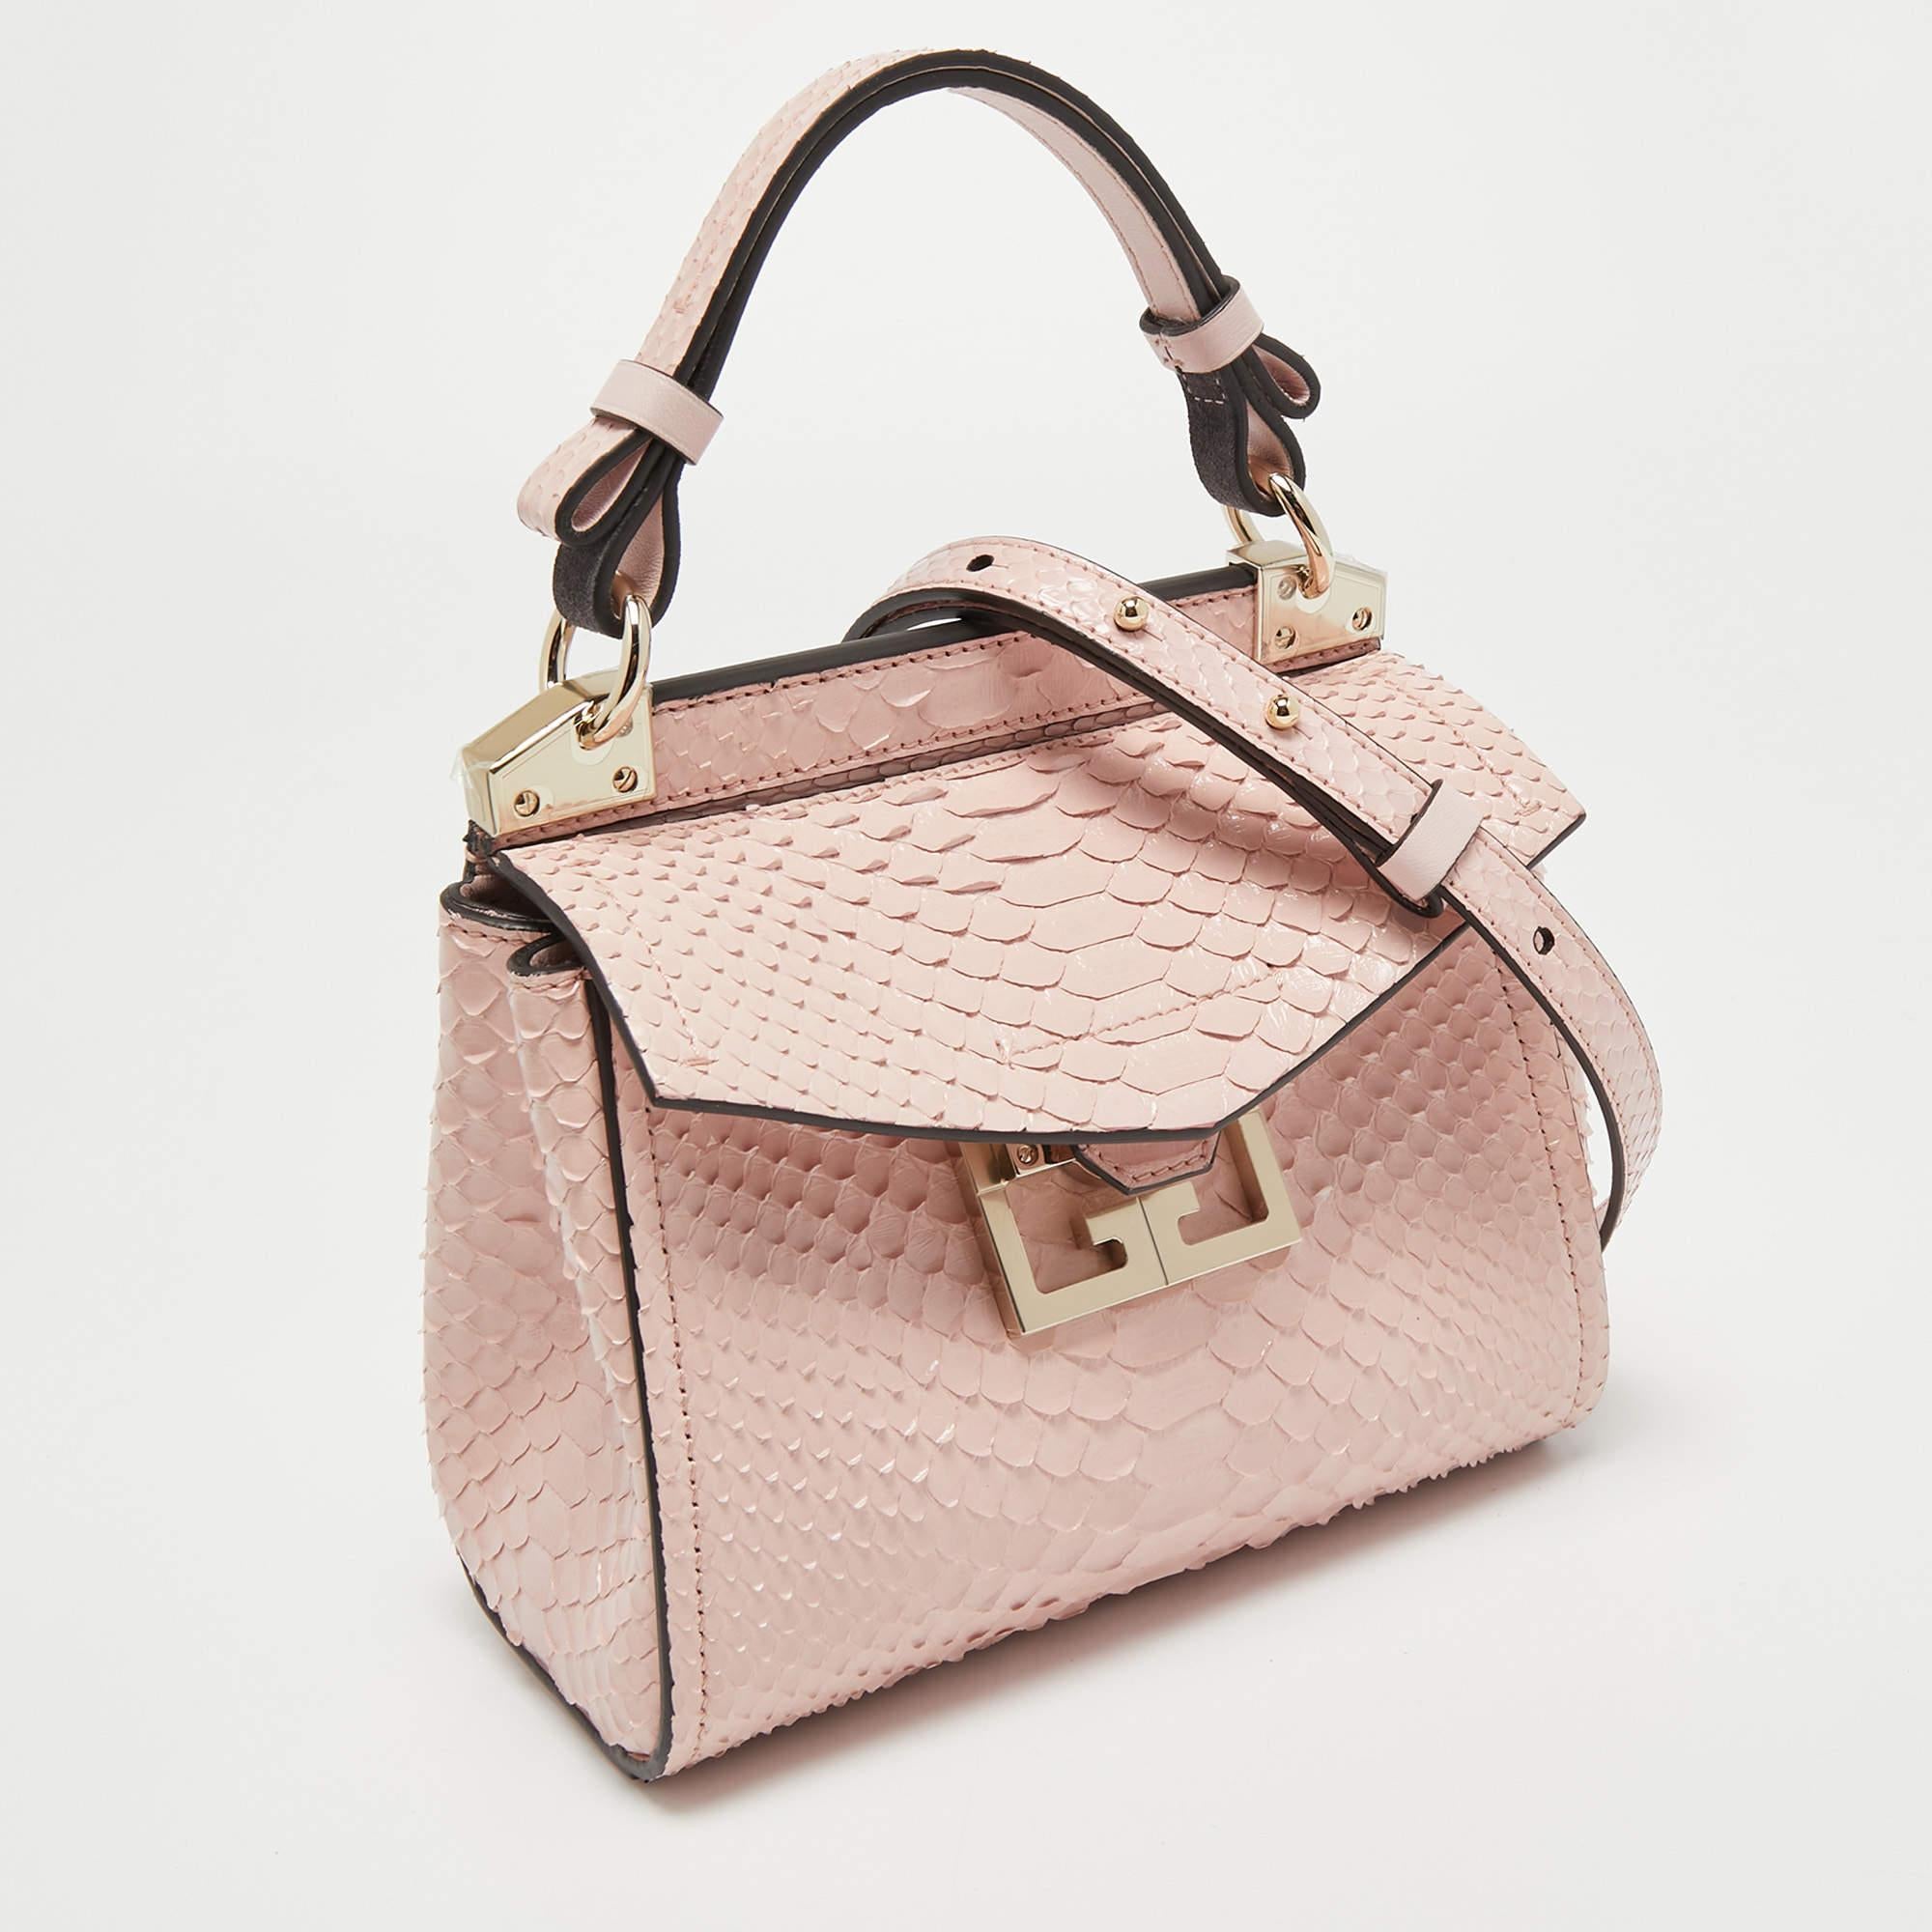 Exuding unparalleled elegance and sophistication, this bag is made from the finest material in a gorgeous hue. While the roomy interior offers ample space, the top handle allows you to carry it with much elegance.

